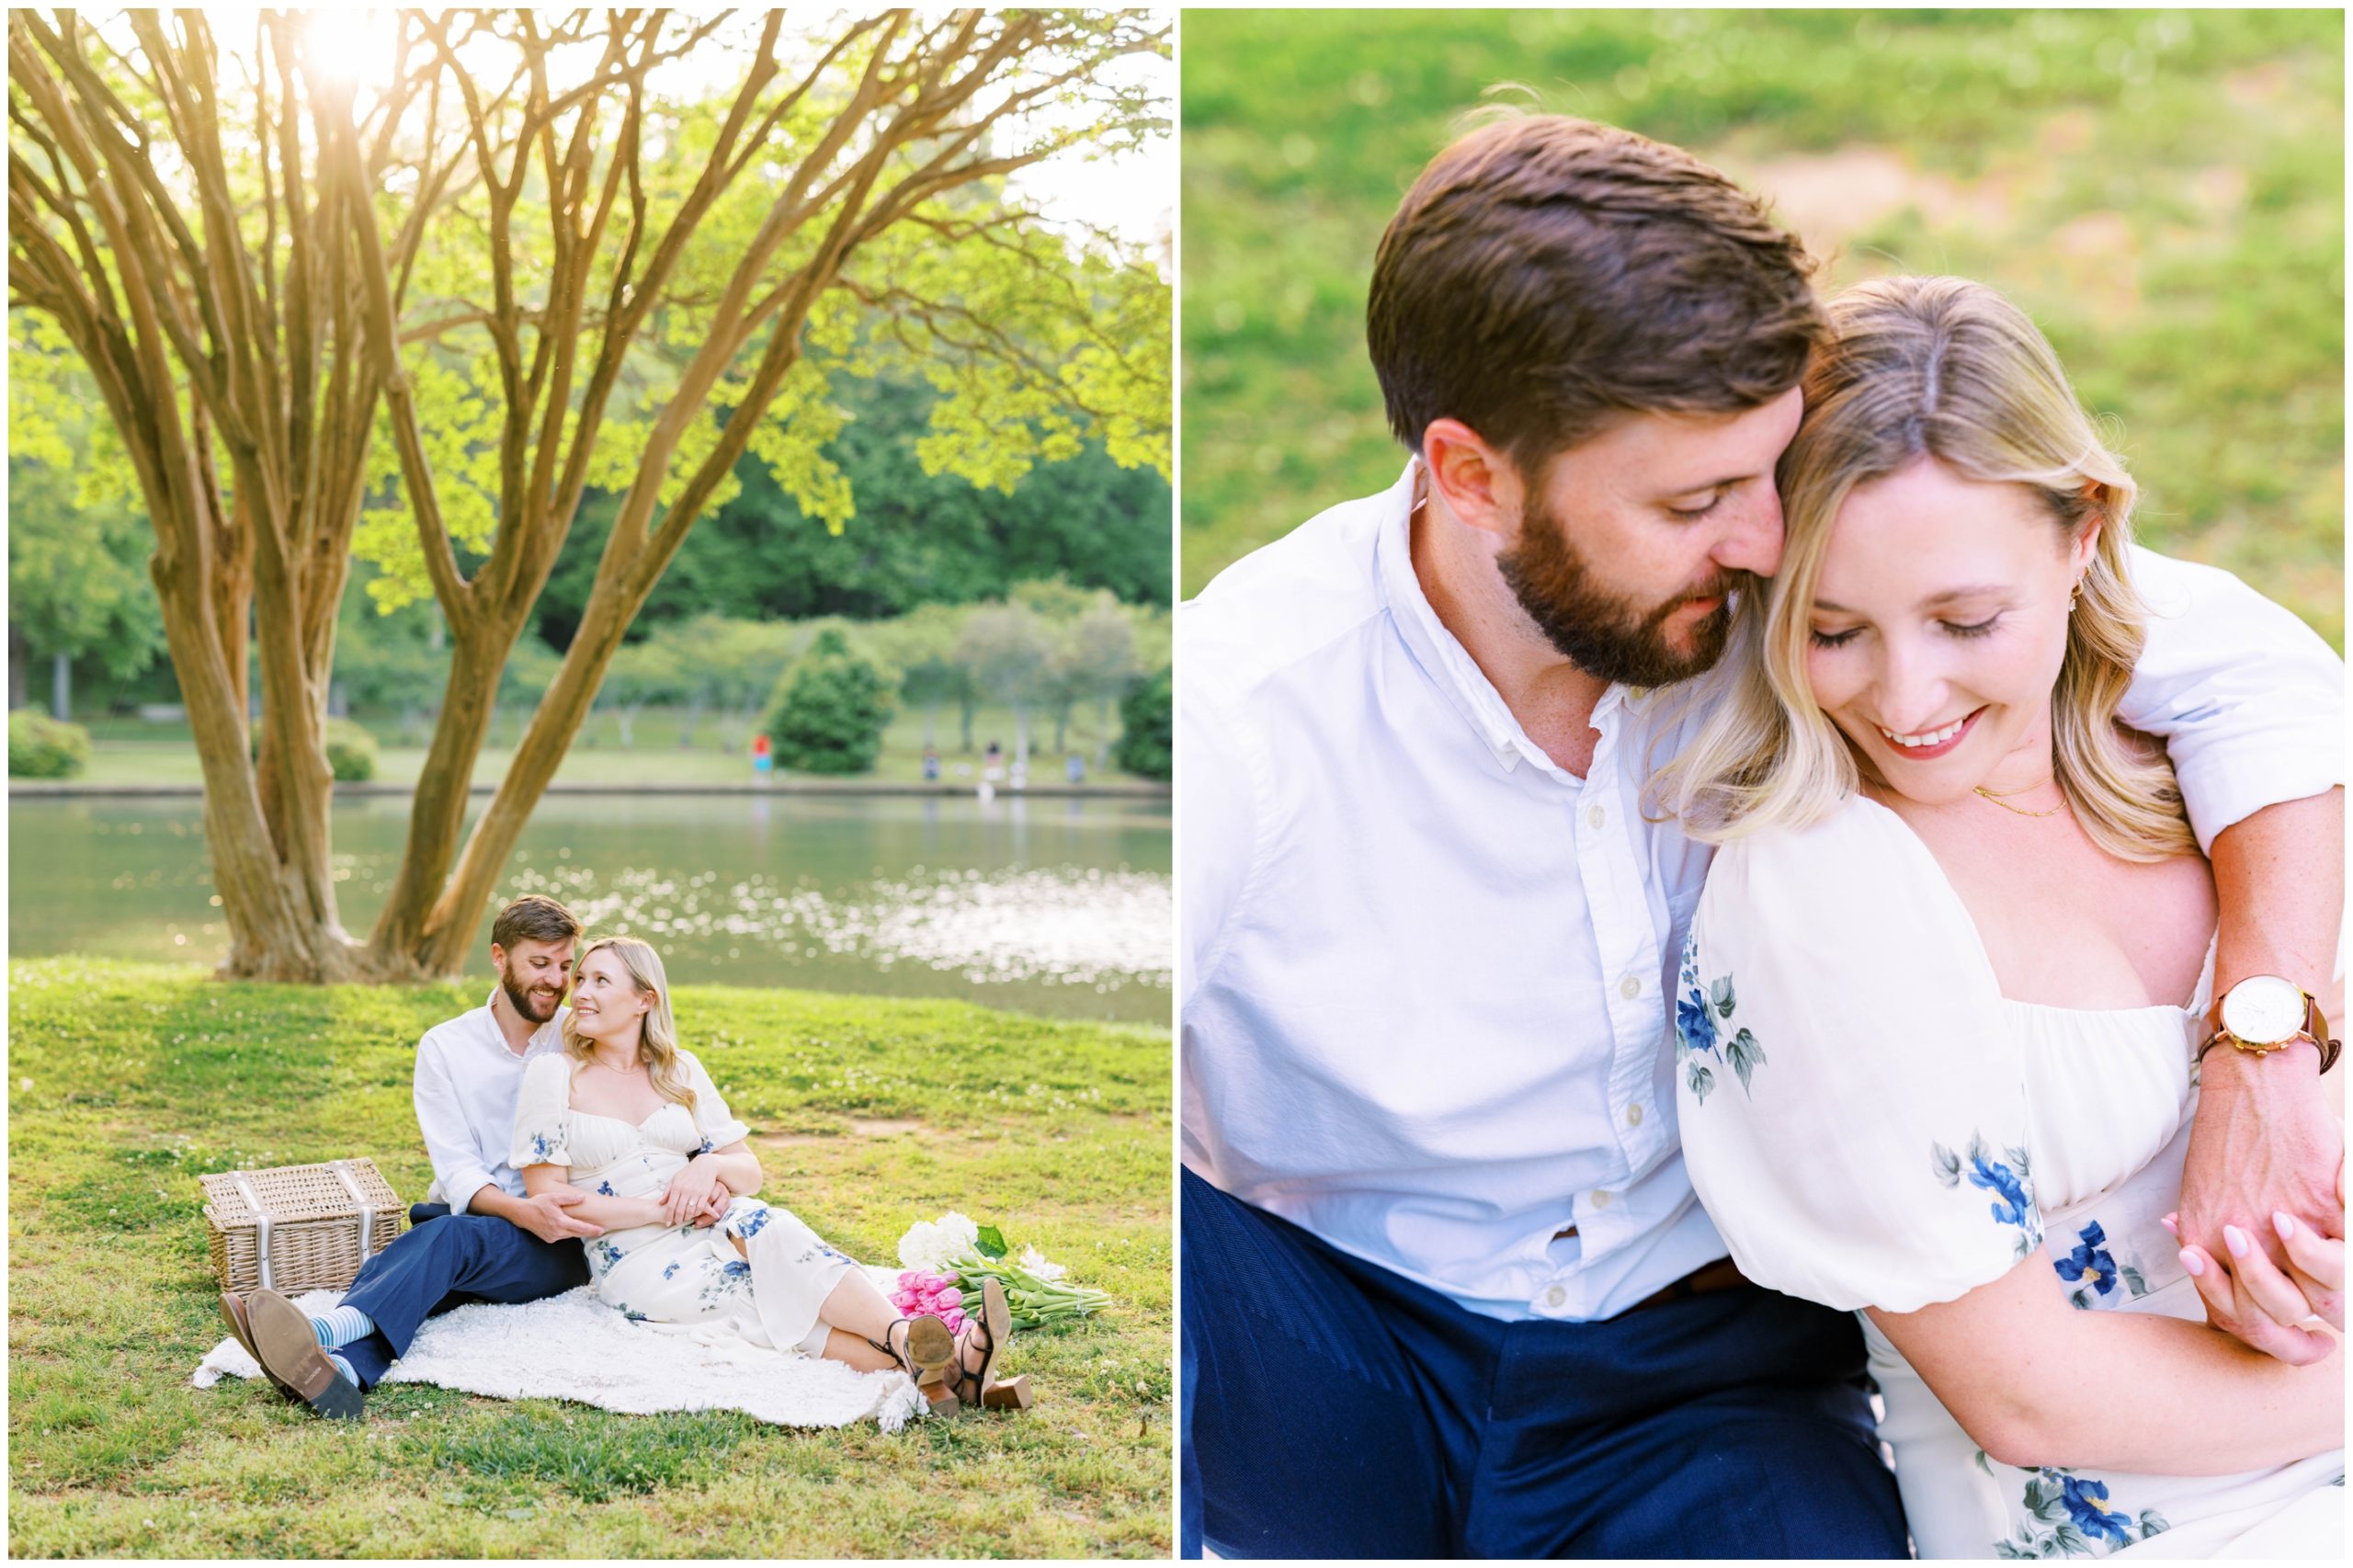 How to feel comfortable and confident during your engagement session